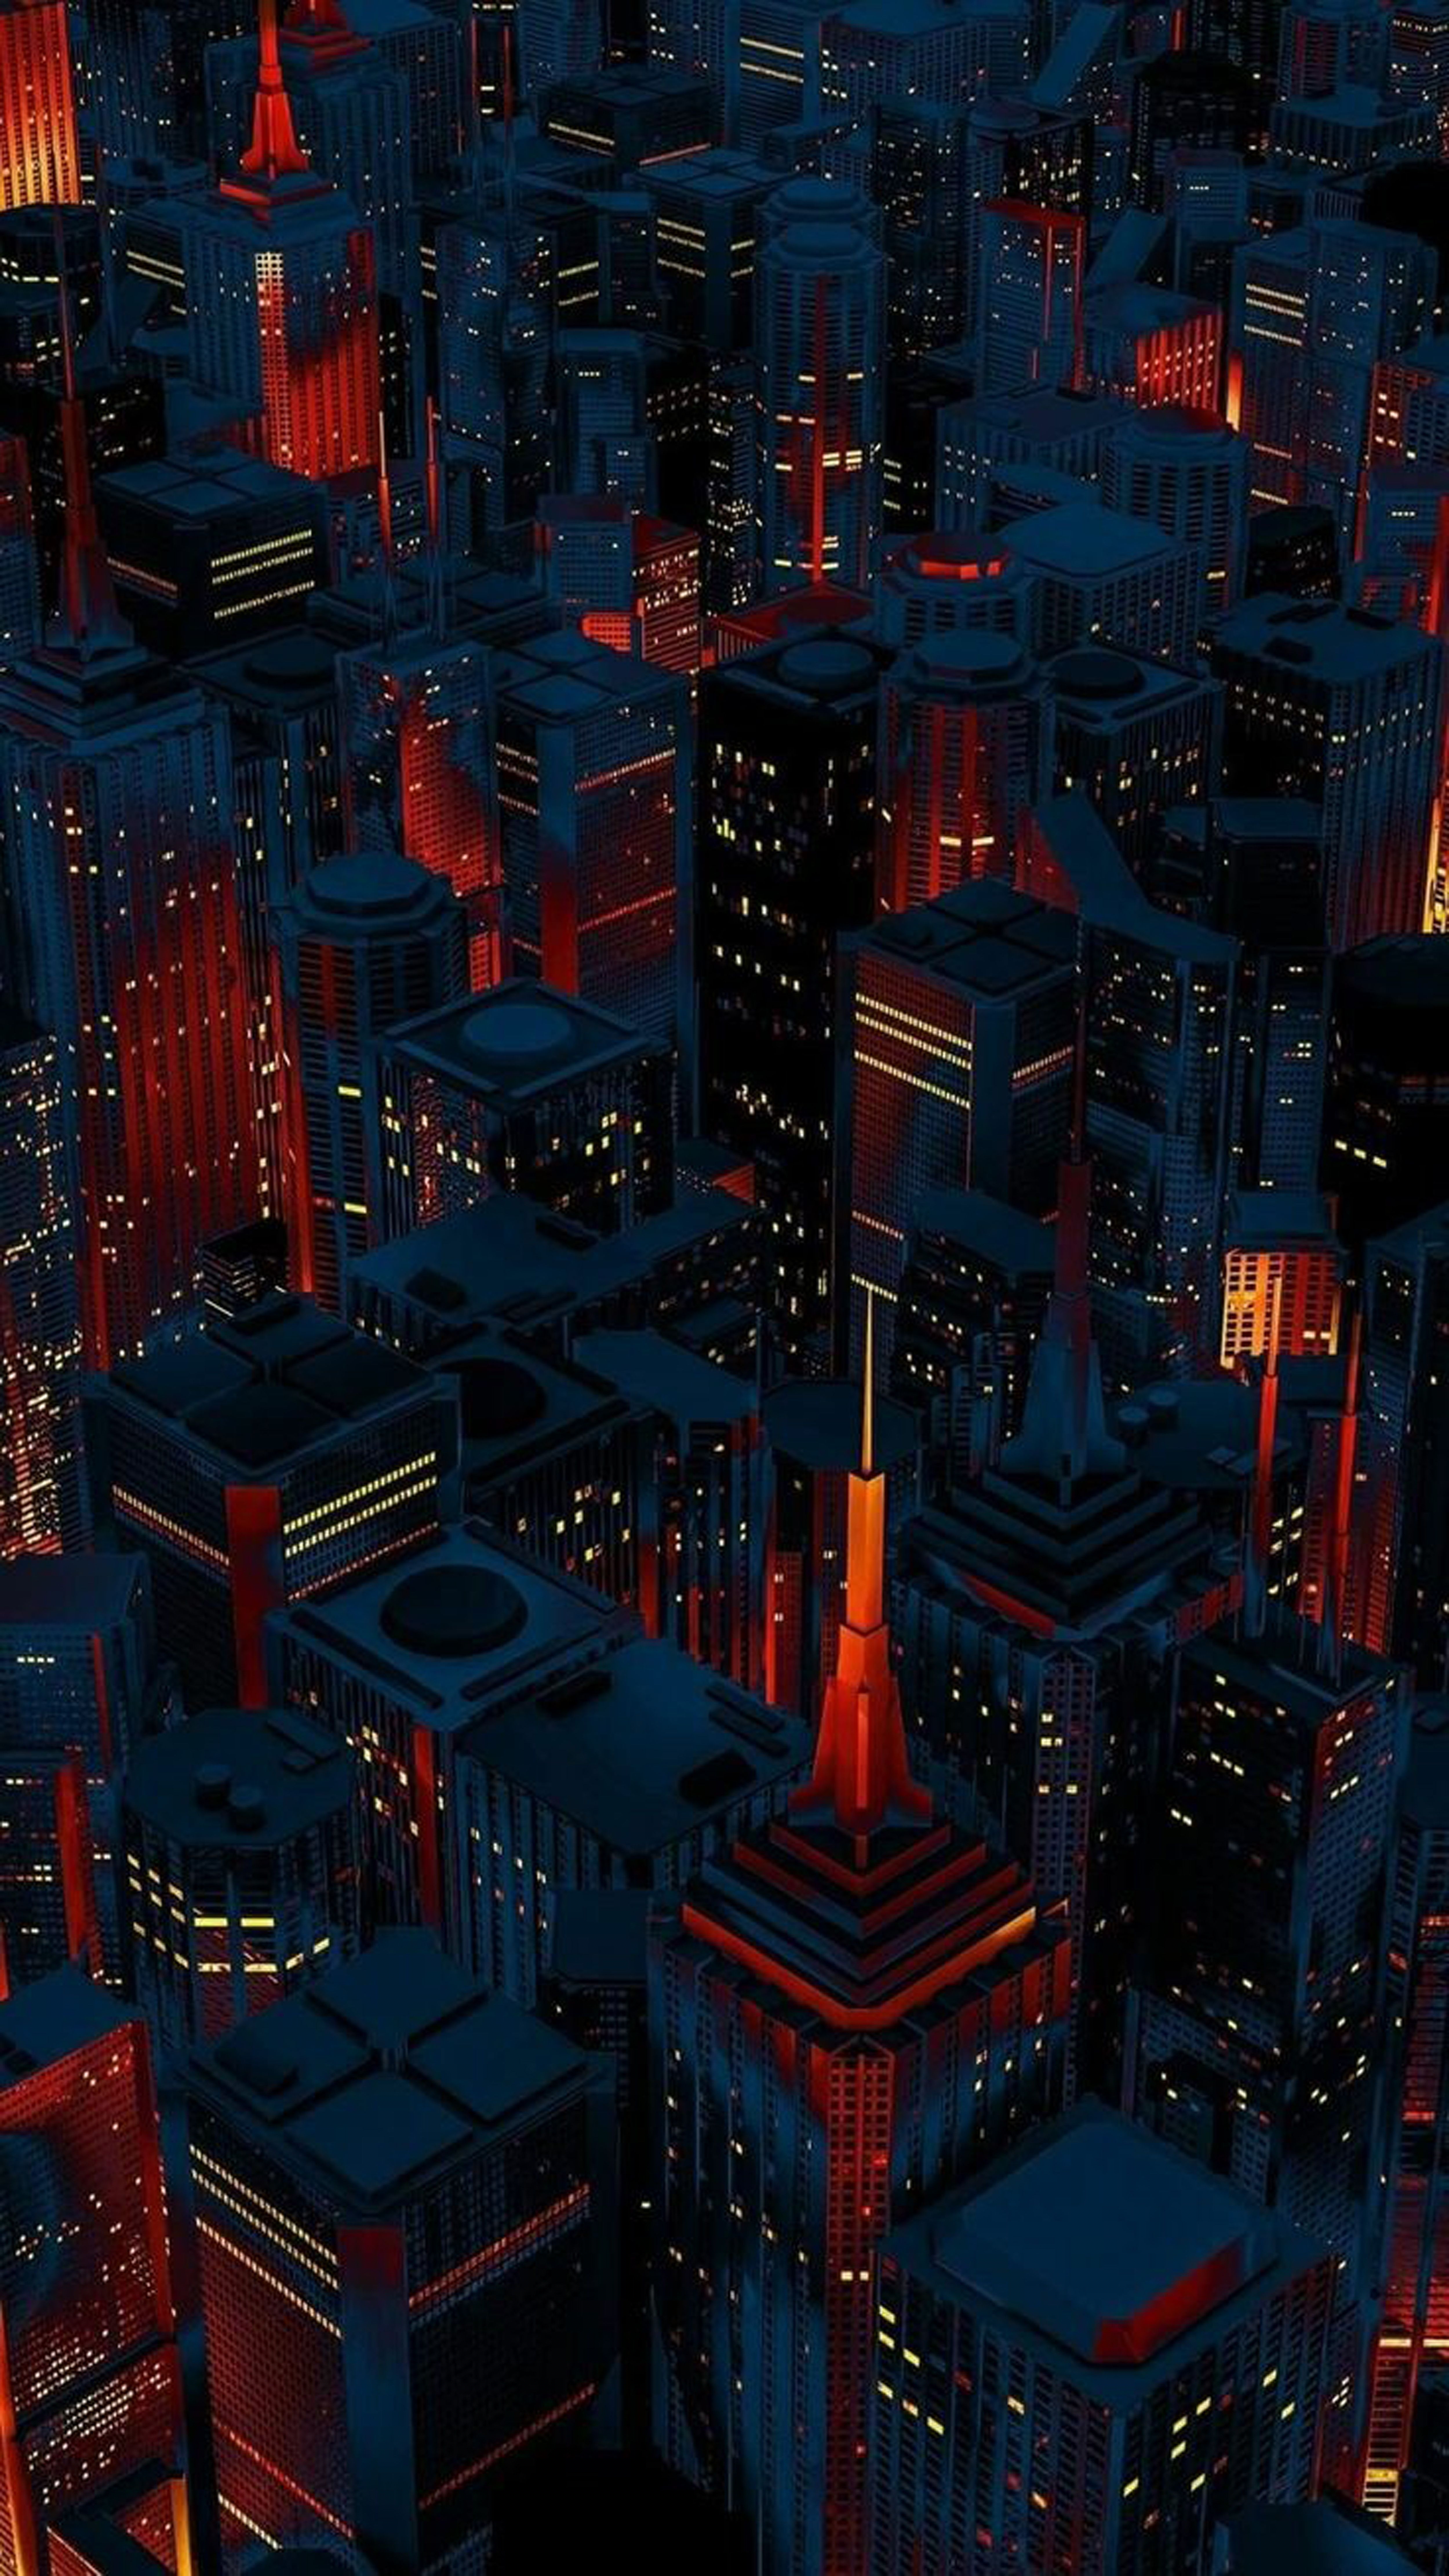 Aesthetic wallpaper for phone of a city at night - Retro, city